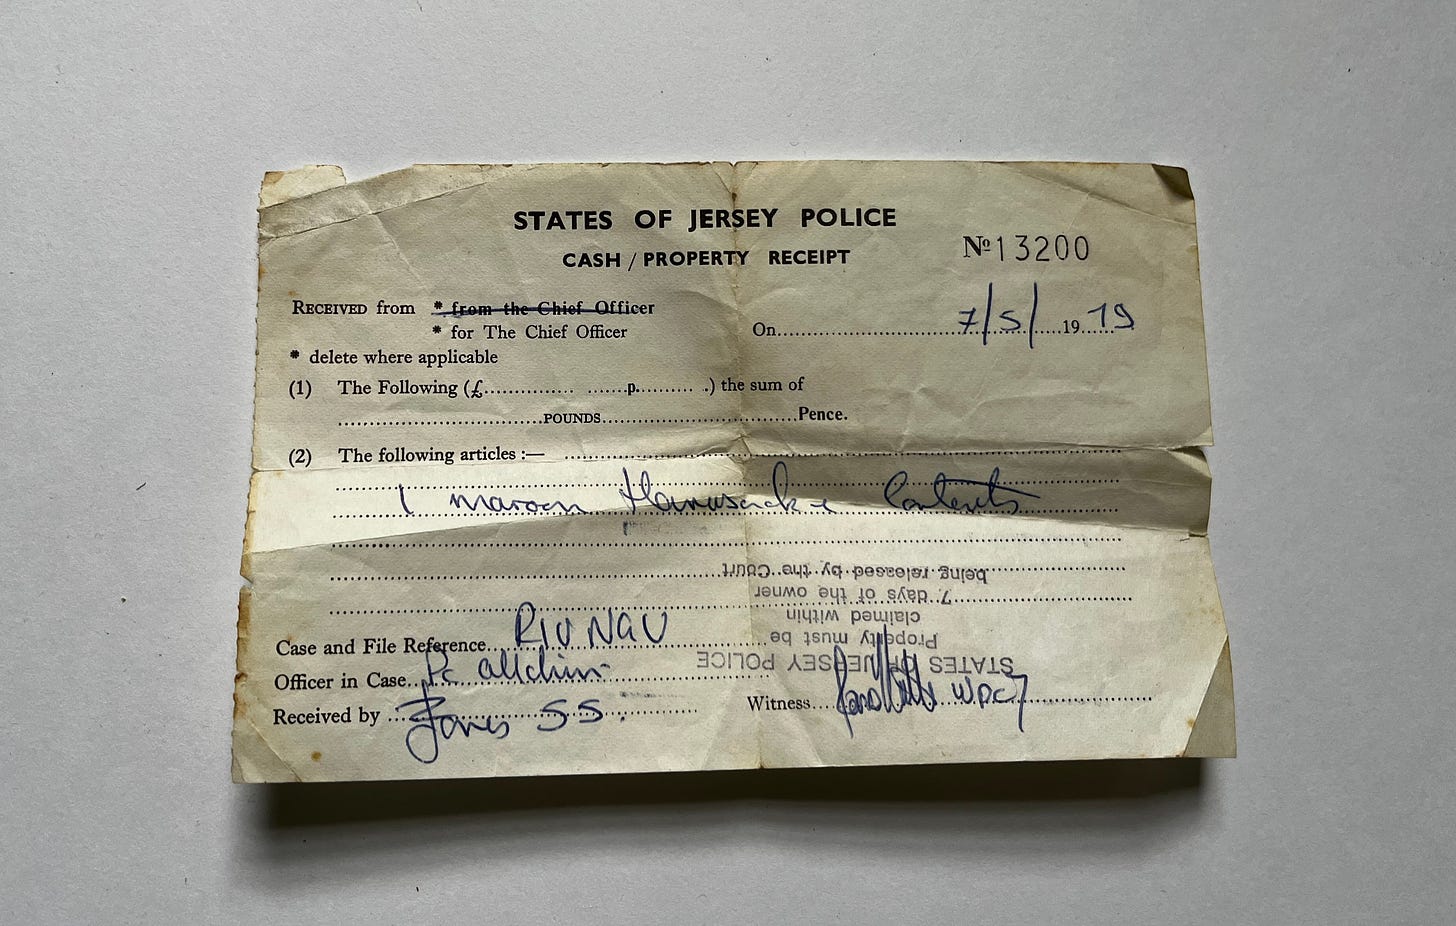 old and worn receipt from the States of Jersey Police for 1 maroon rucksack, dated may 1979